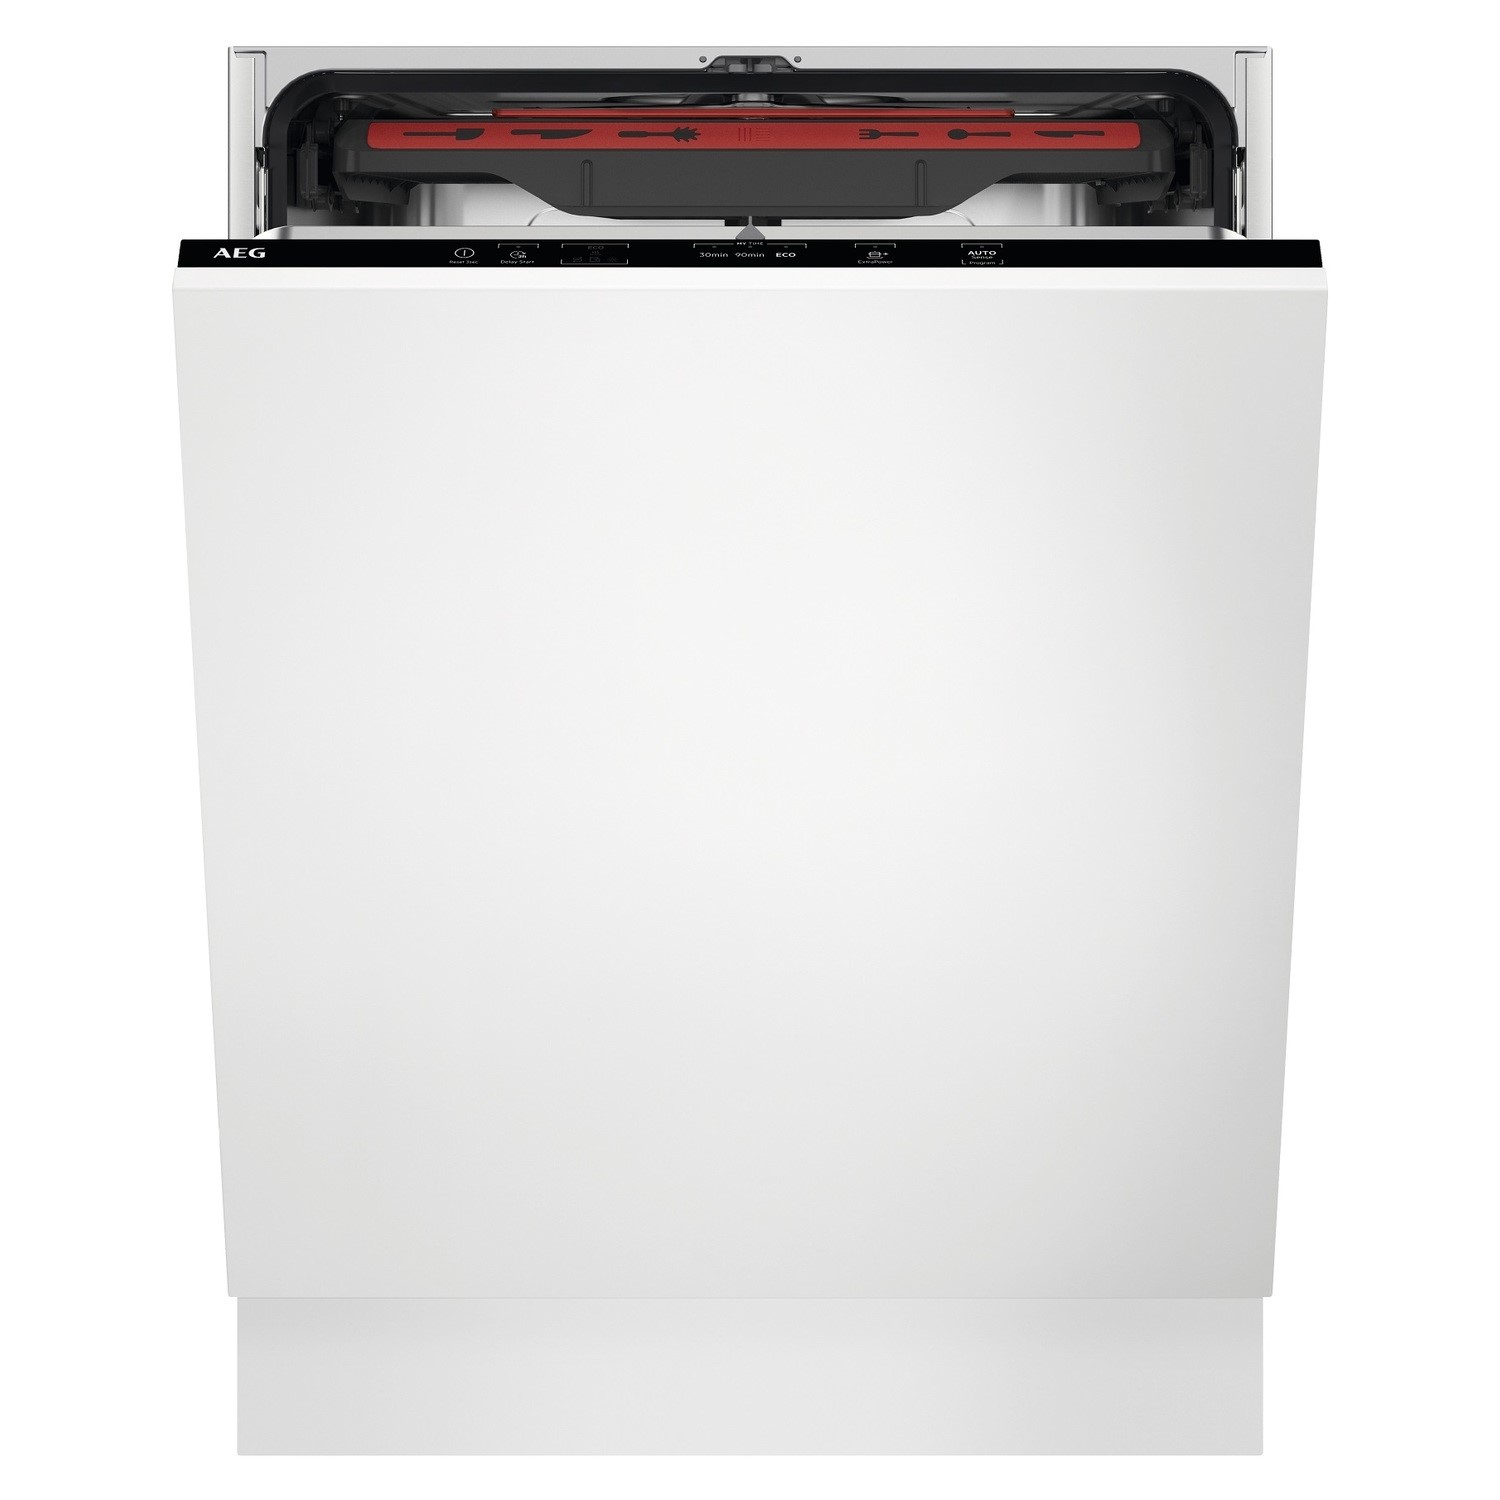 Photos - Other for Computer AEG Series 5000 14 Place Settings Fully Integrated Dishwasher 911535306 